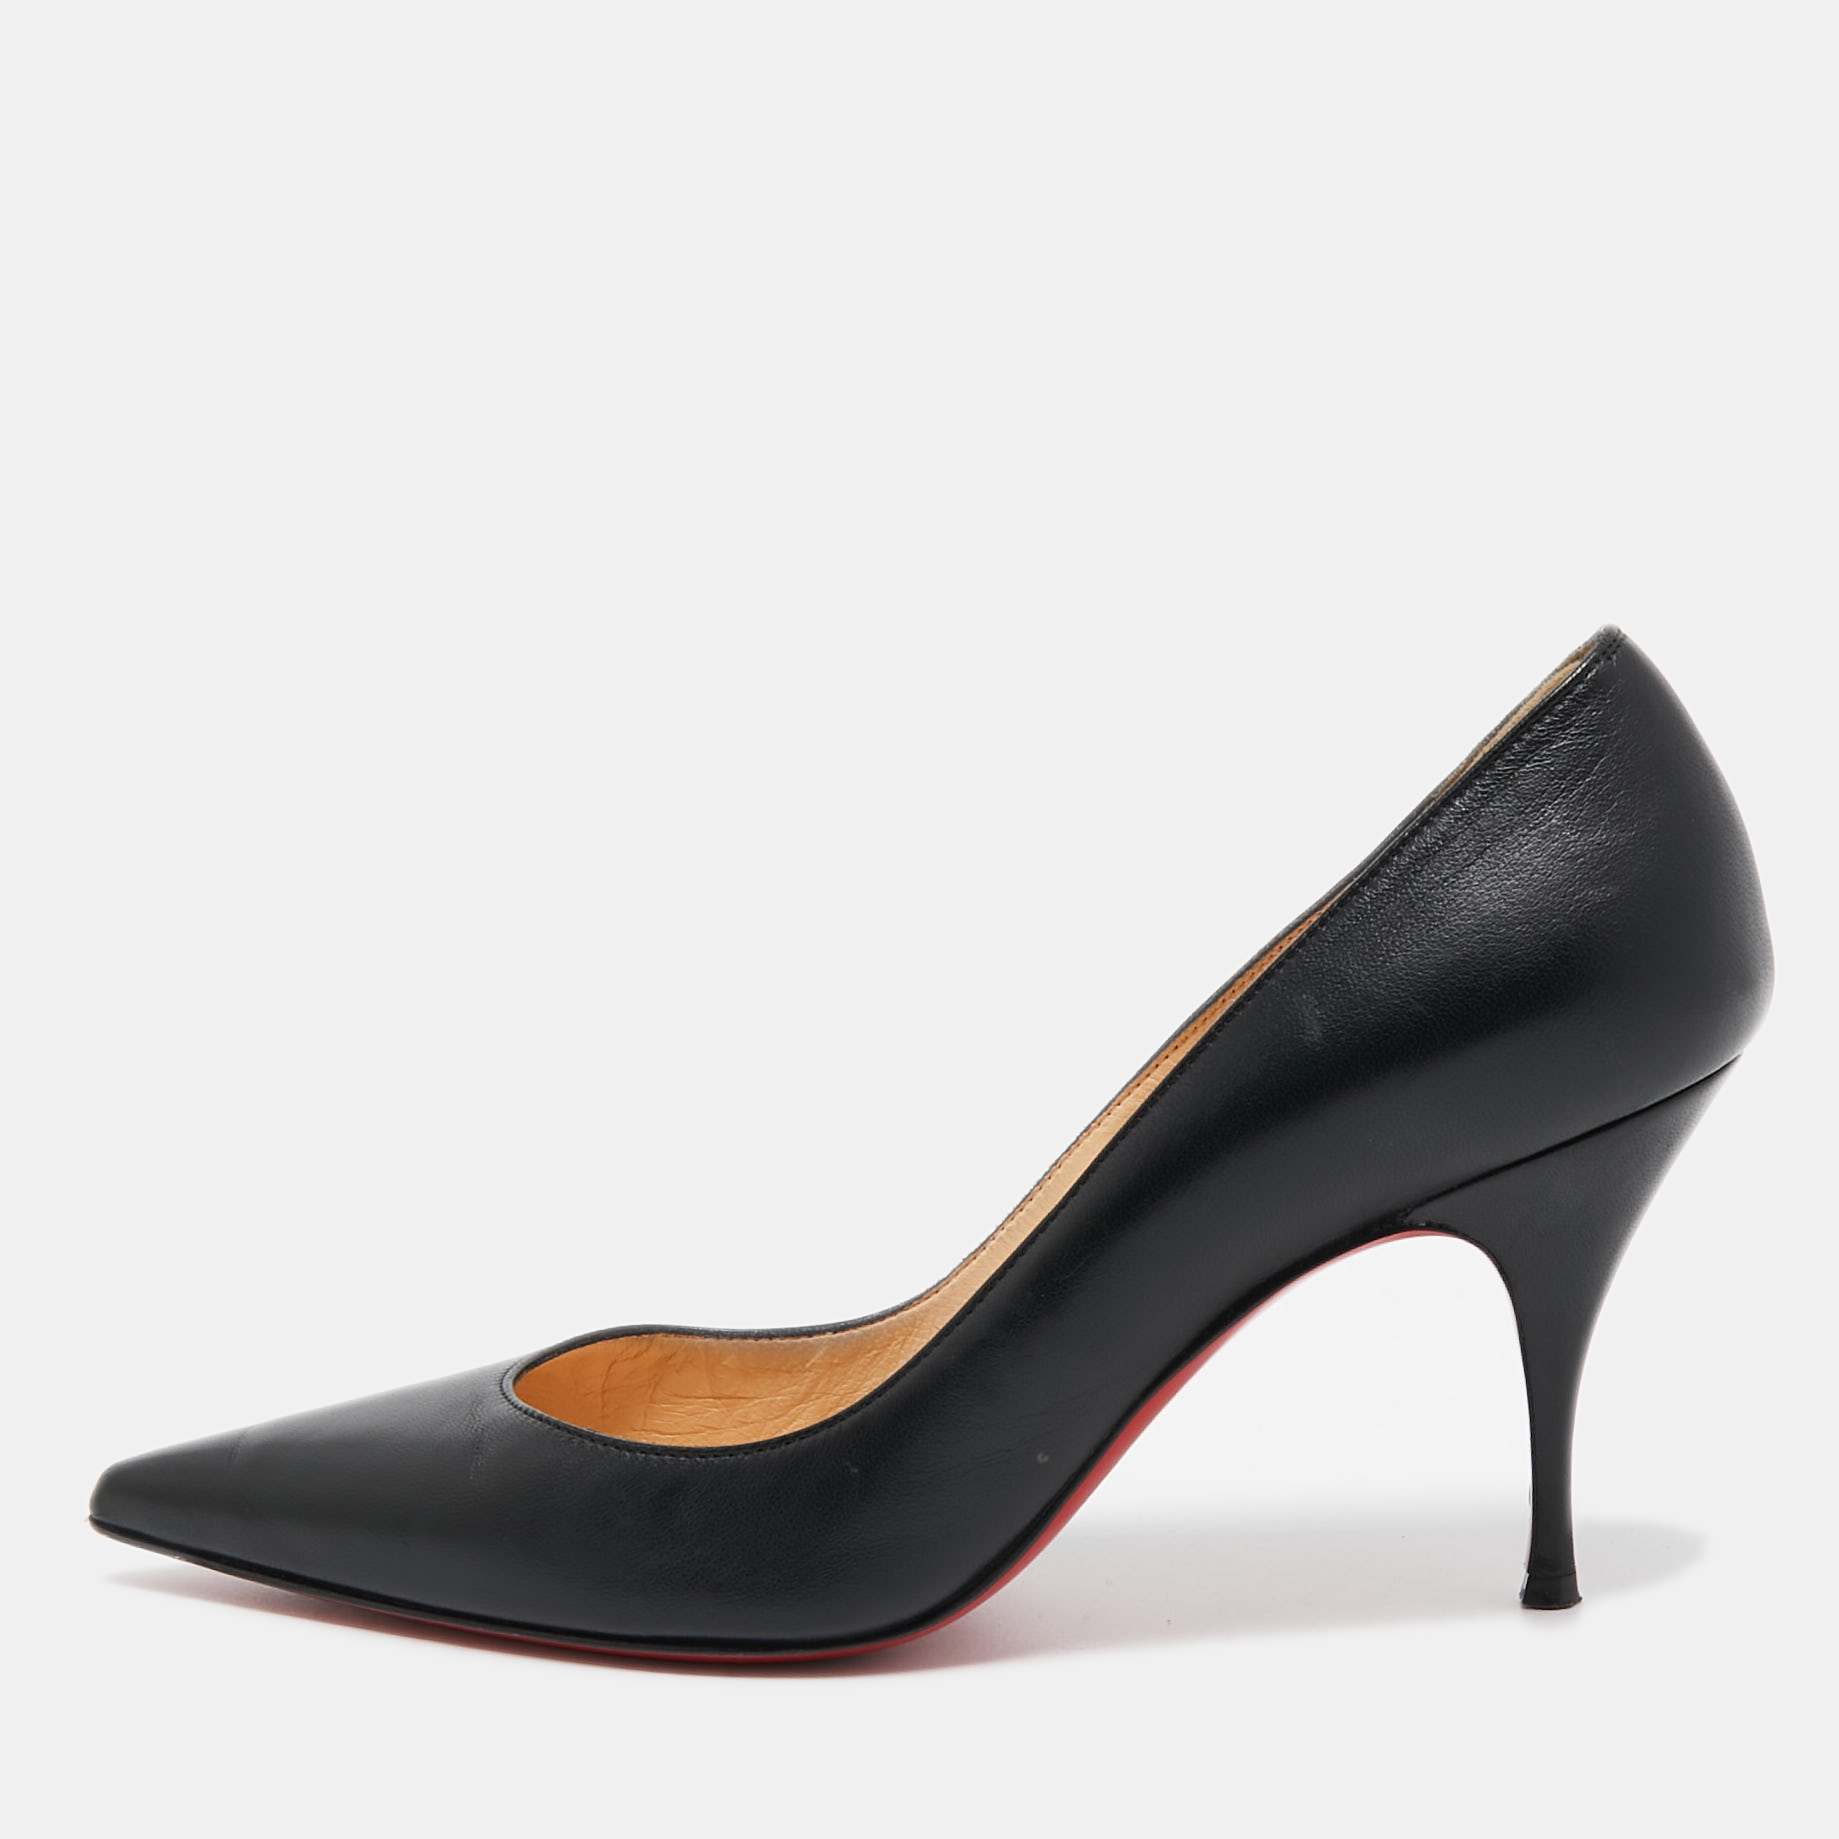 Pre-owned Christian Louboutin Black Leather Pointed Toe Pumps Size 36